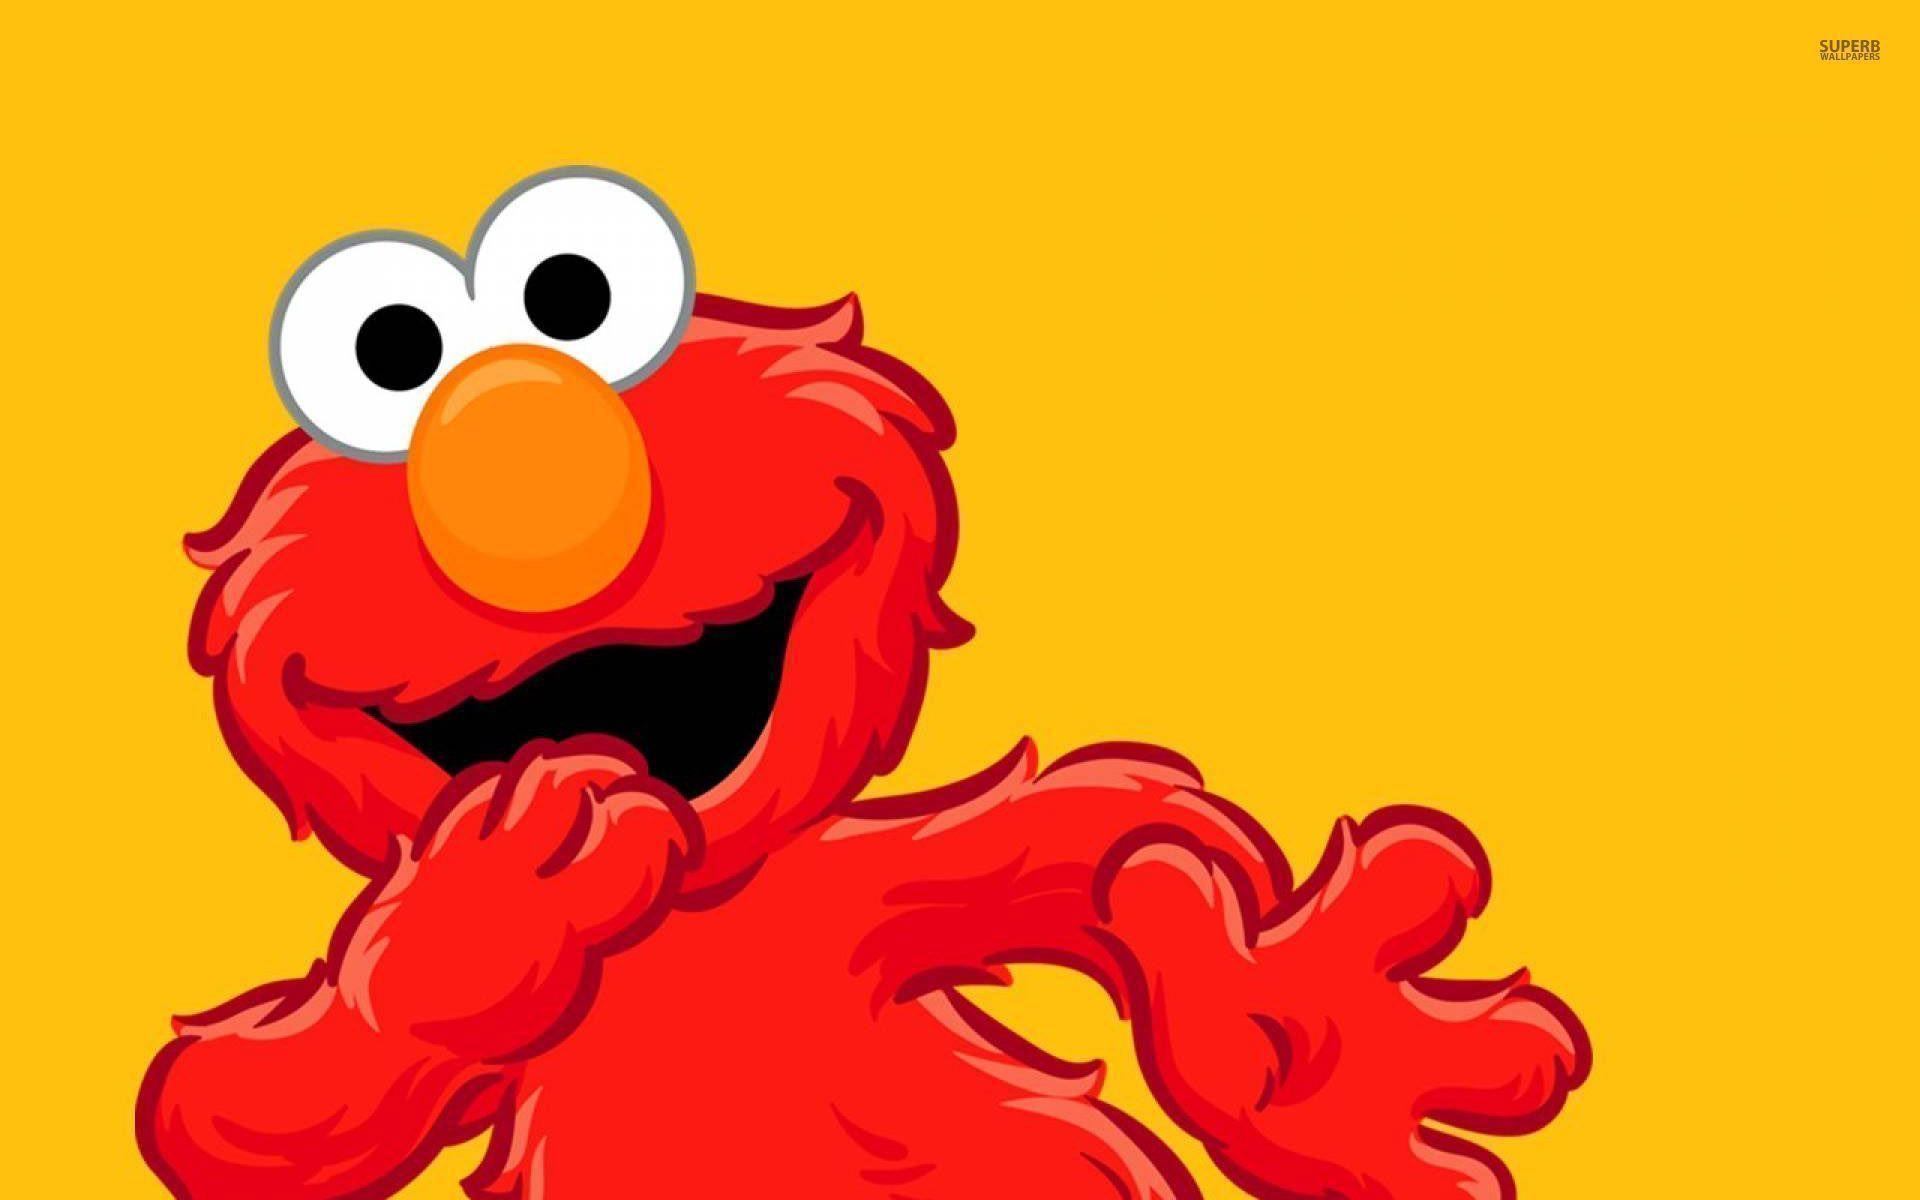 100% Quality HD Elmo Wallpaper and Picture Collection